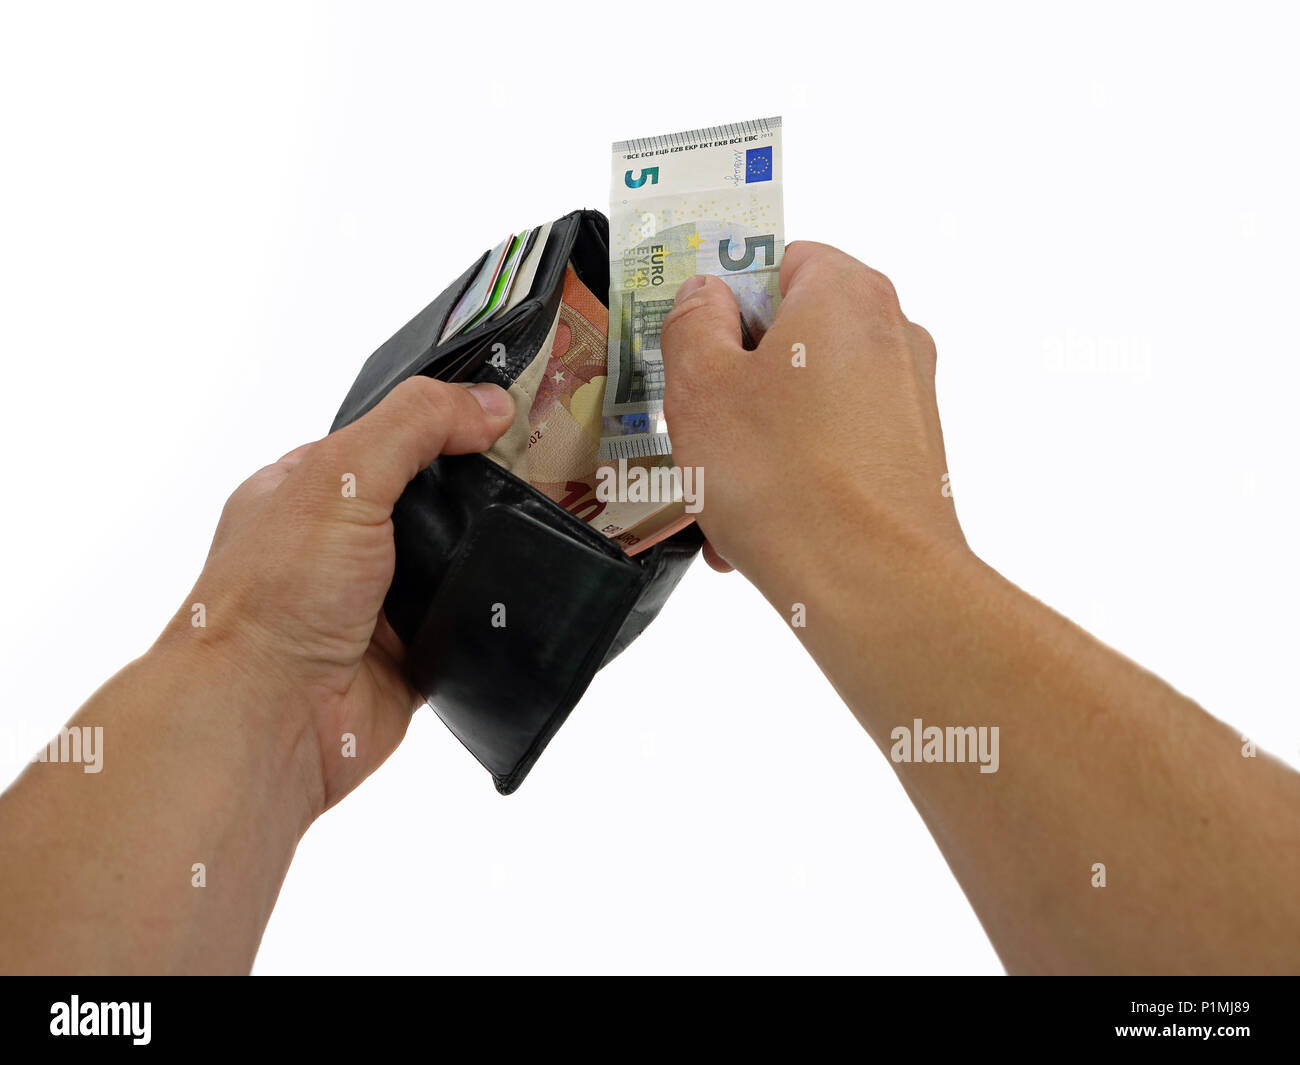 Hands taking out money from wallet in a first person view isolated on white background. Stock Photo